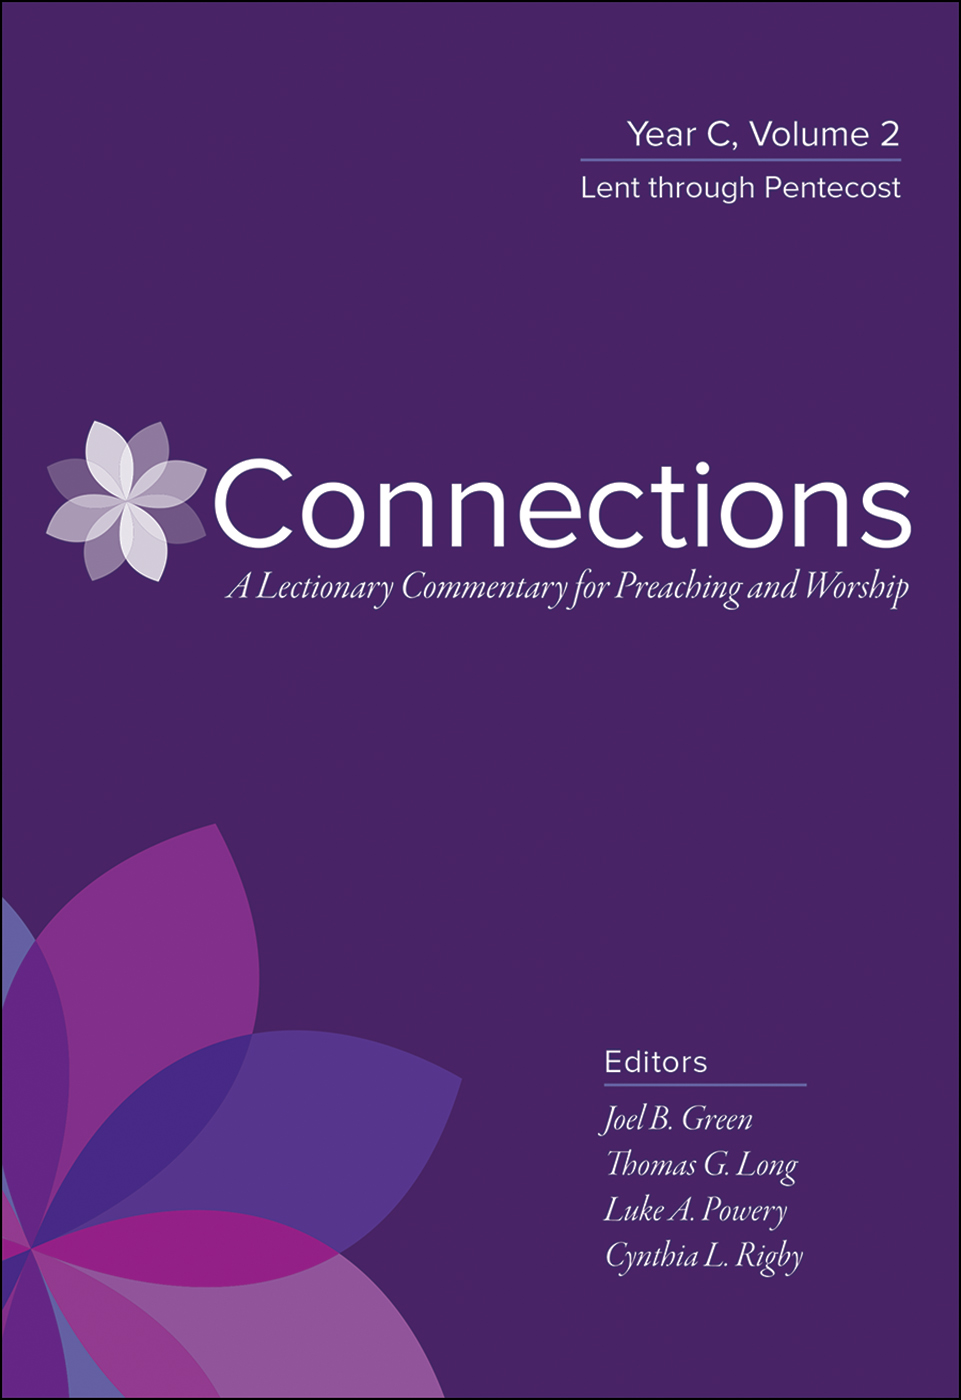 Connections: Year C, Volume 2